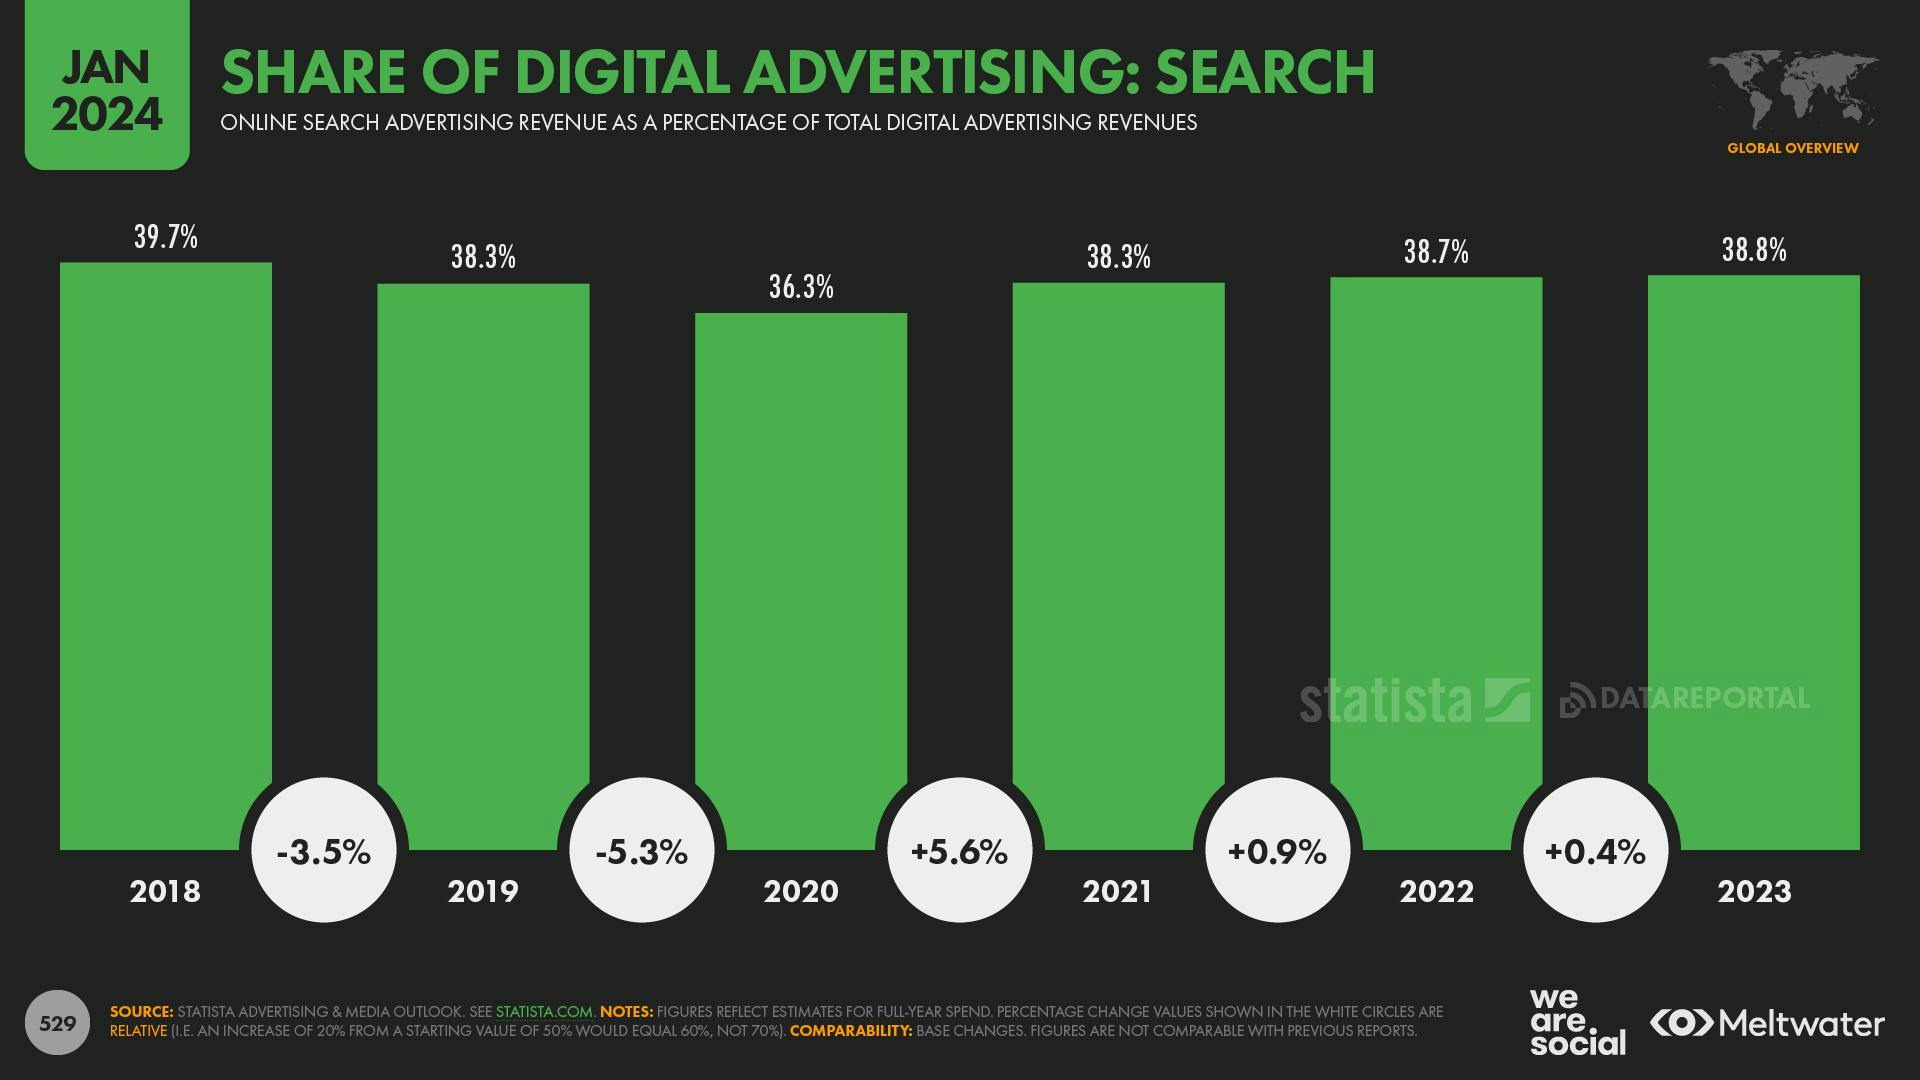 Share of digital advertising: Search